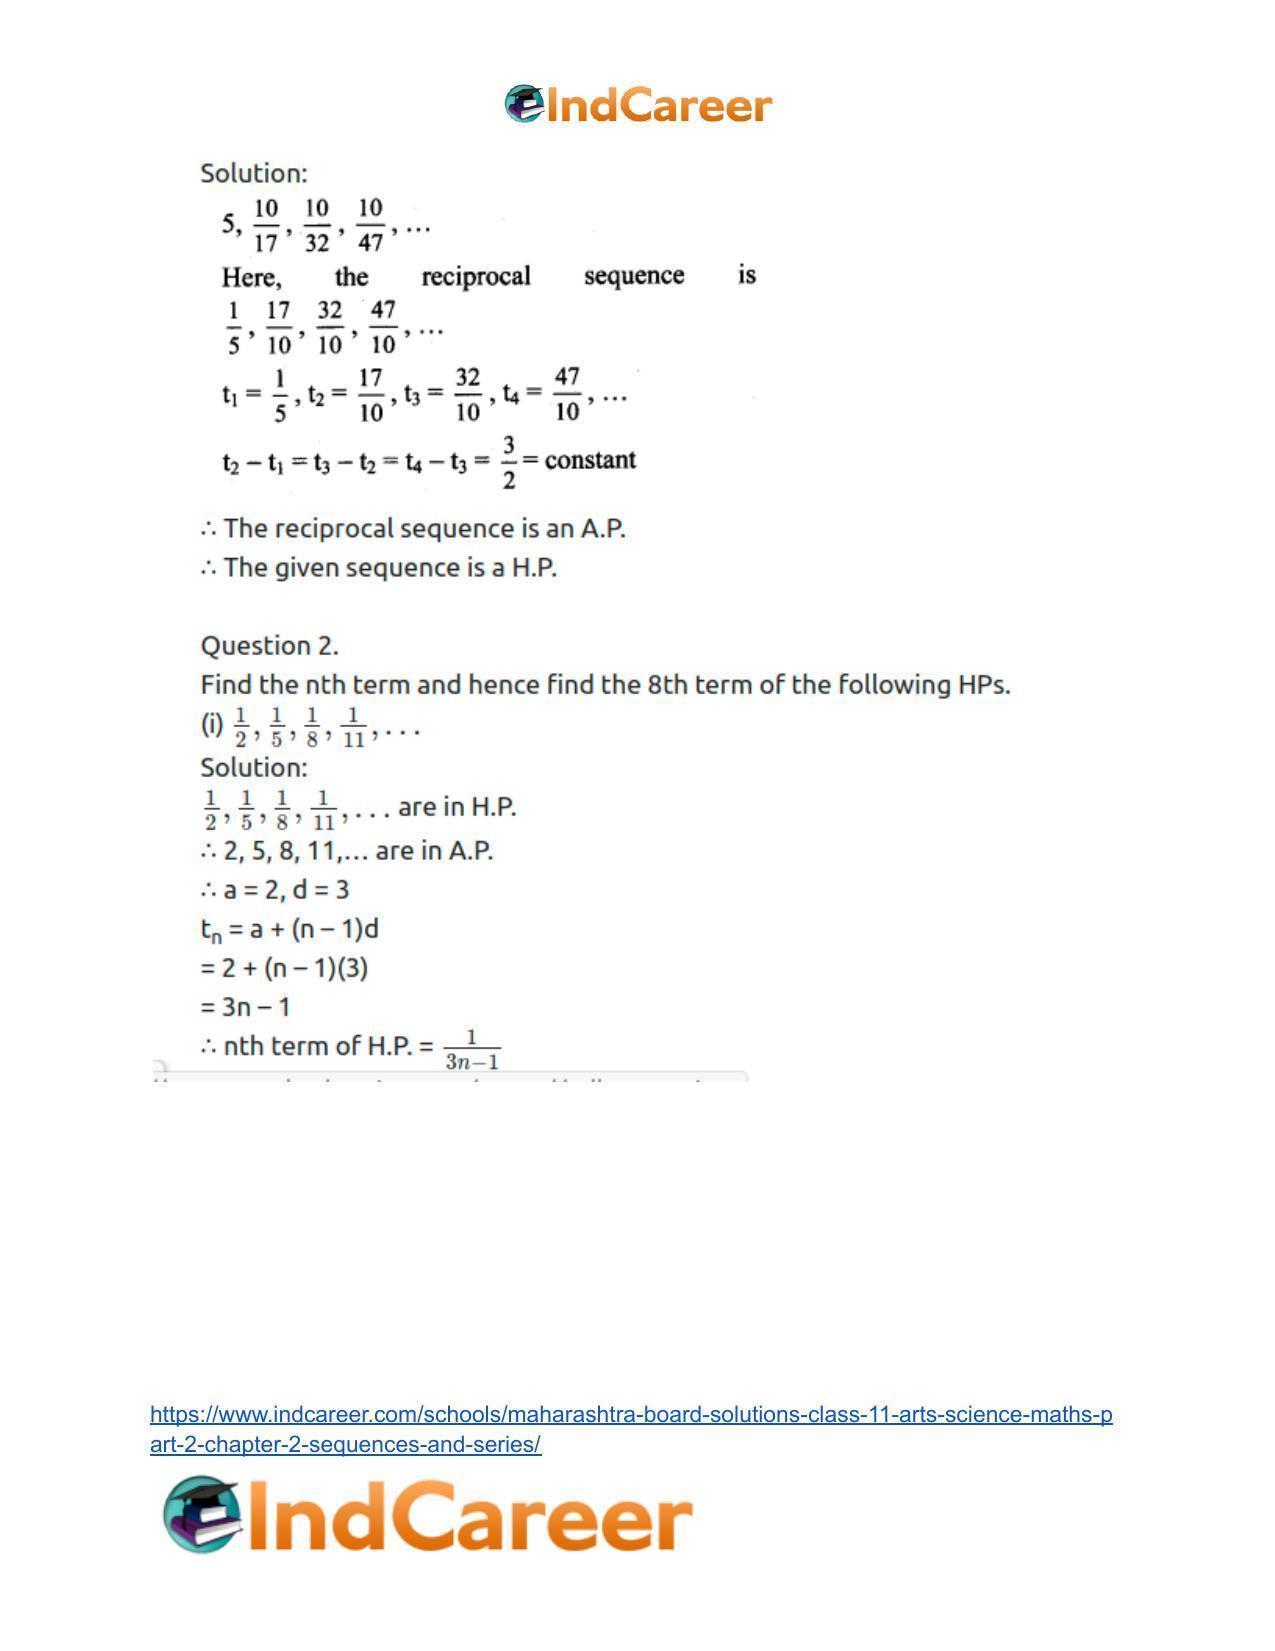 Maharashtra Board Solutions Class 11-Arts & Science Maths (Part 2): Chapter 2- Sequences and Series - Page 52